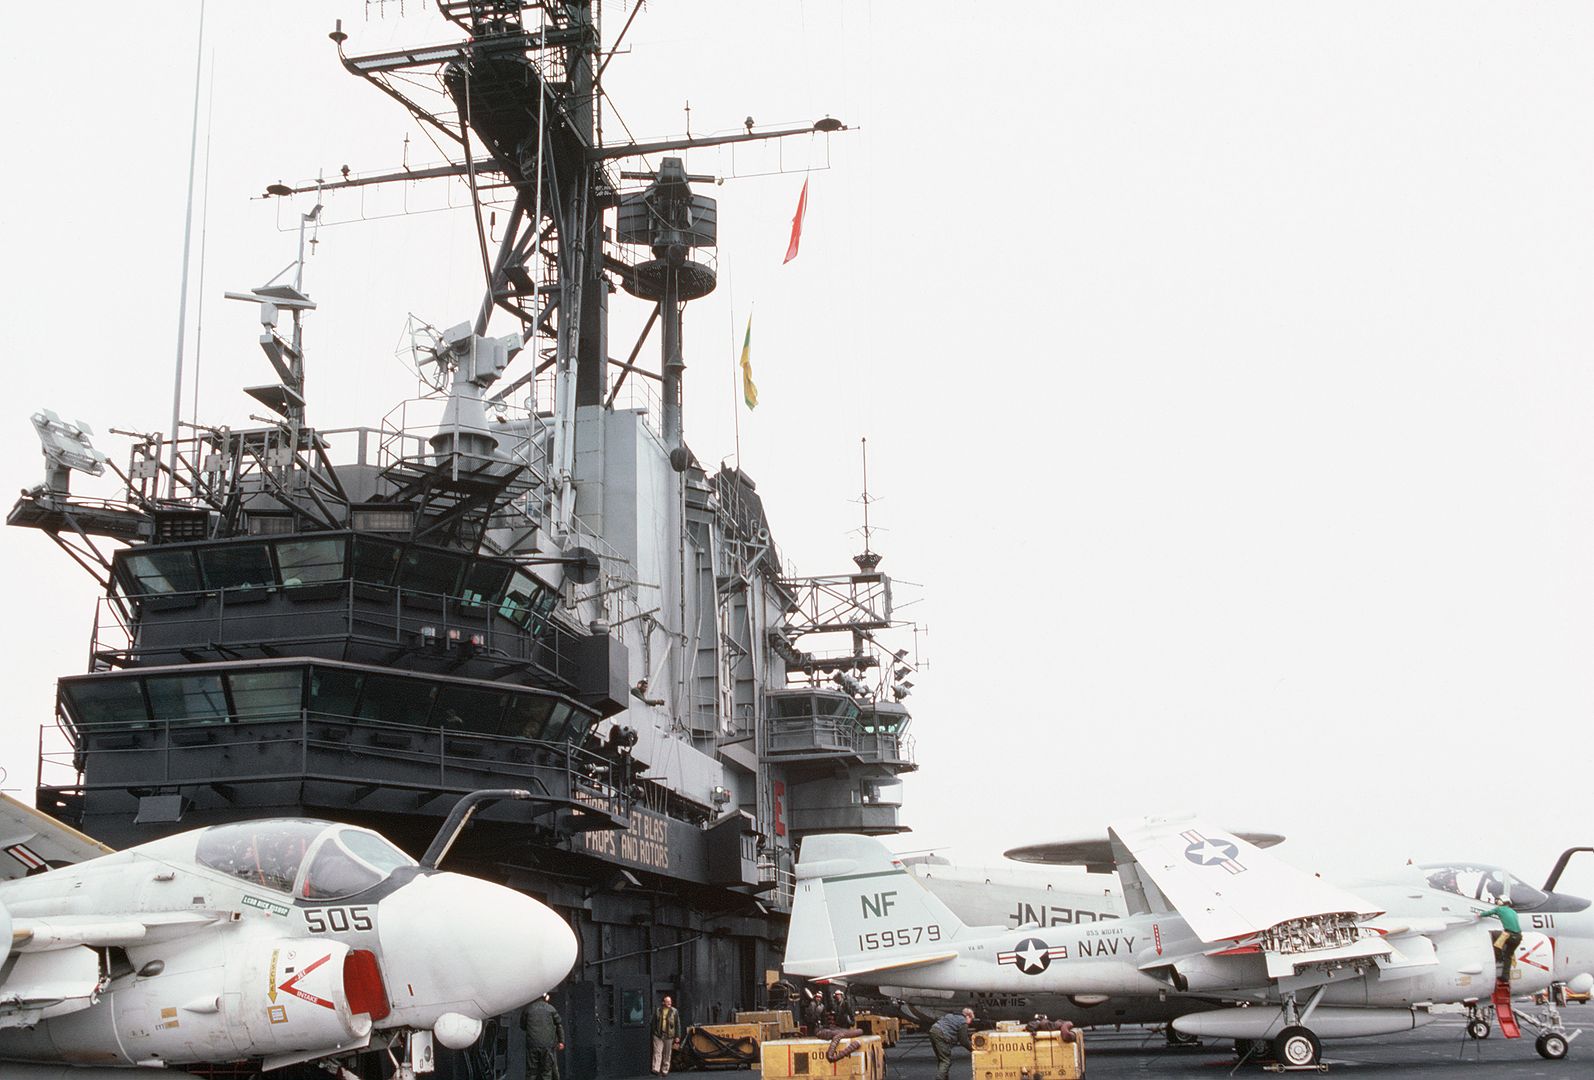 A View Of The Island Aboard The Aircraft Carrier USS MIDWAY Two A 6 Intruder Aircraft And An E 2 Hawkeye Airborne Early Warning Aircraft Background Are Parked On The Deck